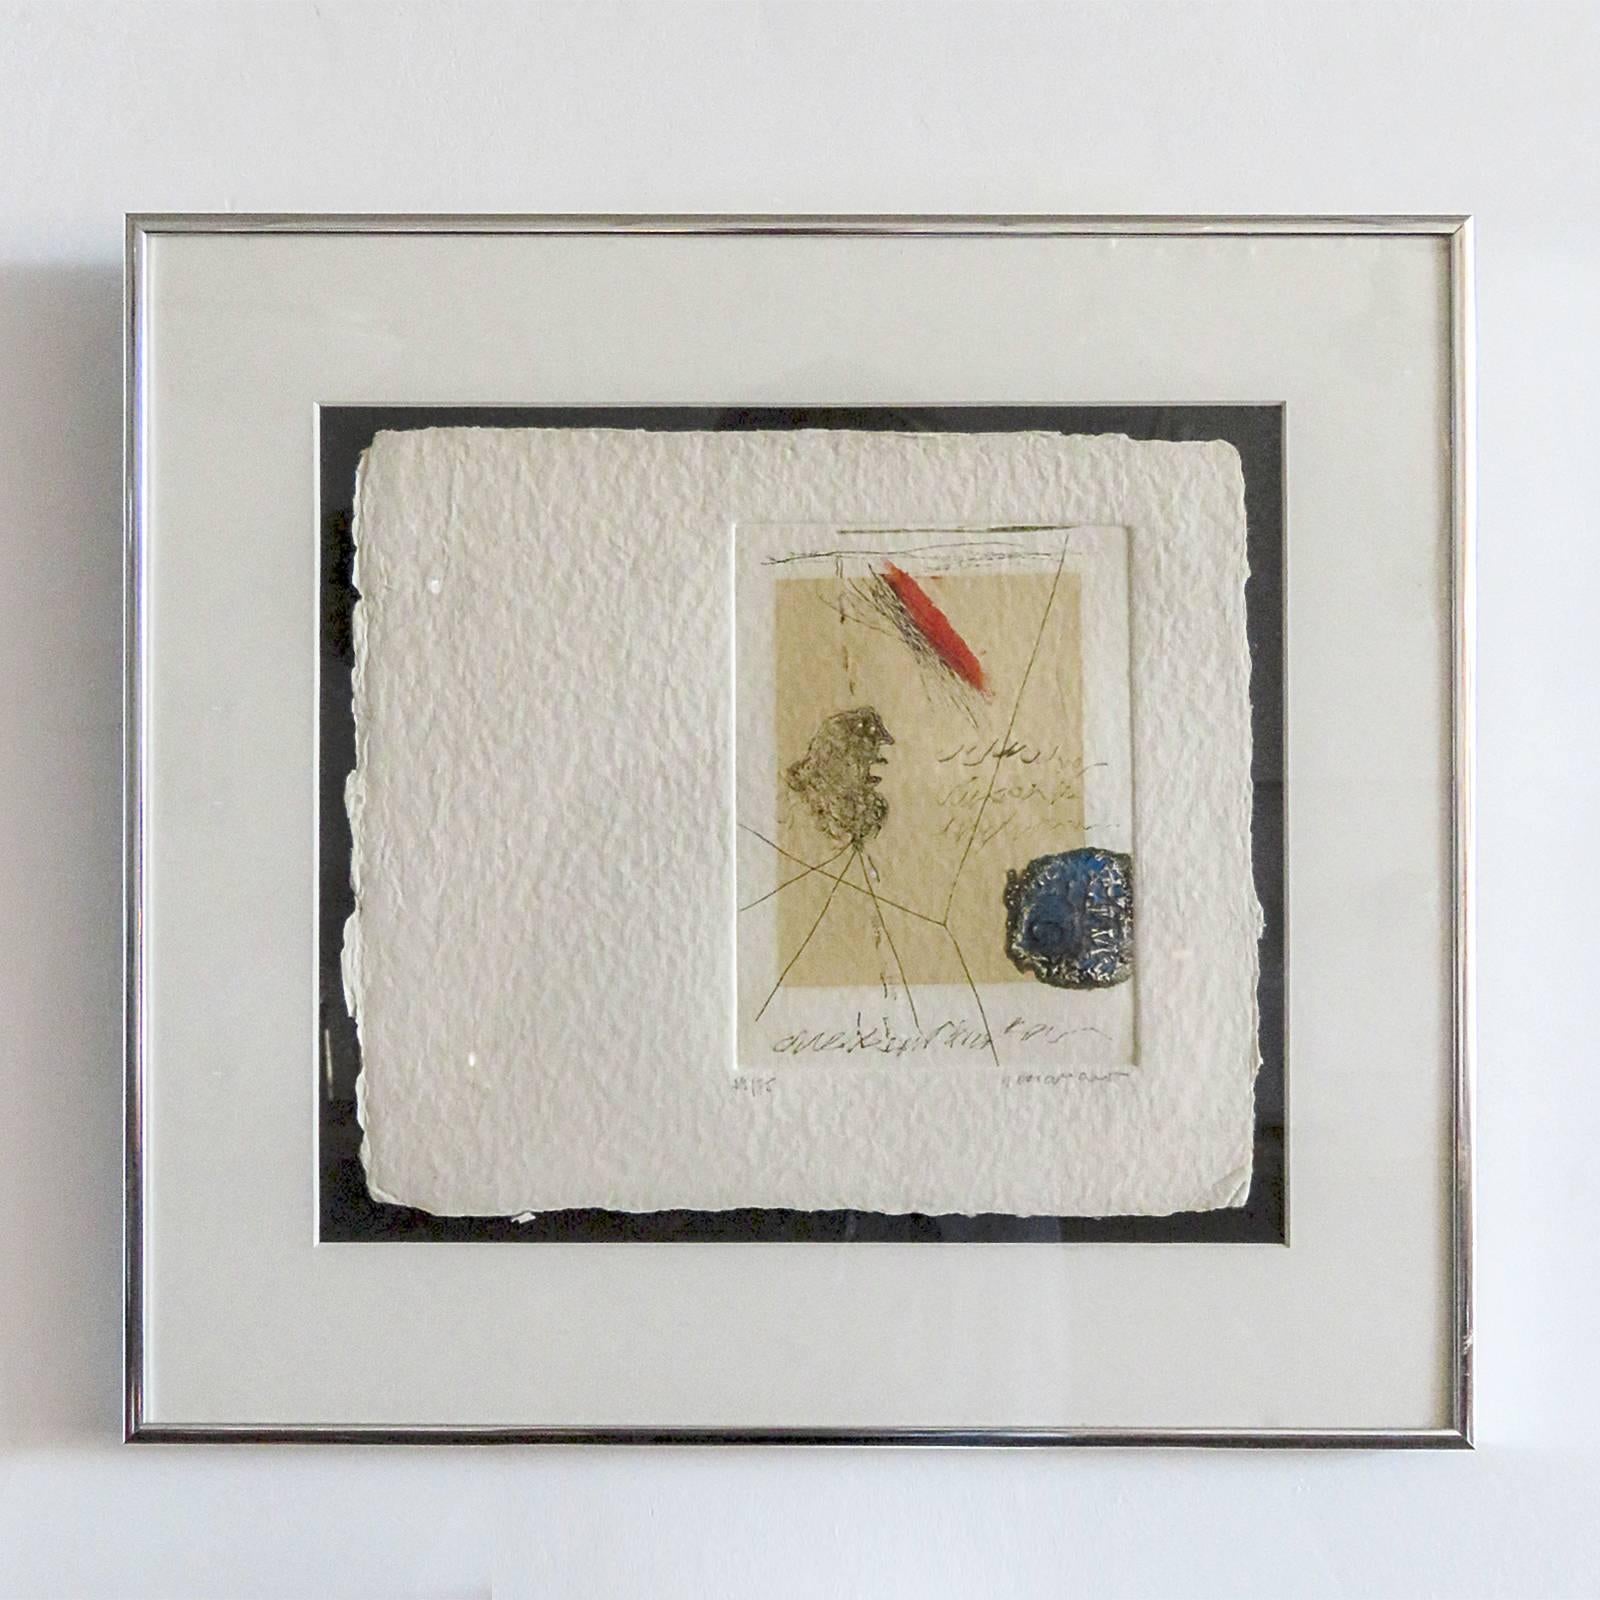 wonderful original signed and framed carborundum etching 'Composition' by French artist James Coignard (1925-2008), provenance: Galleri S:T Lars, Sweden, exhibited March 22nd 1986, pencil signed and numbered by Coignard: 59/75, image size: 10"